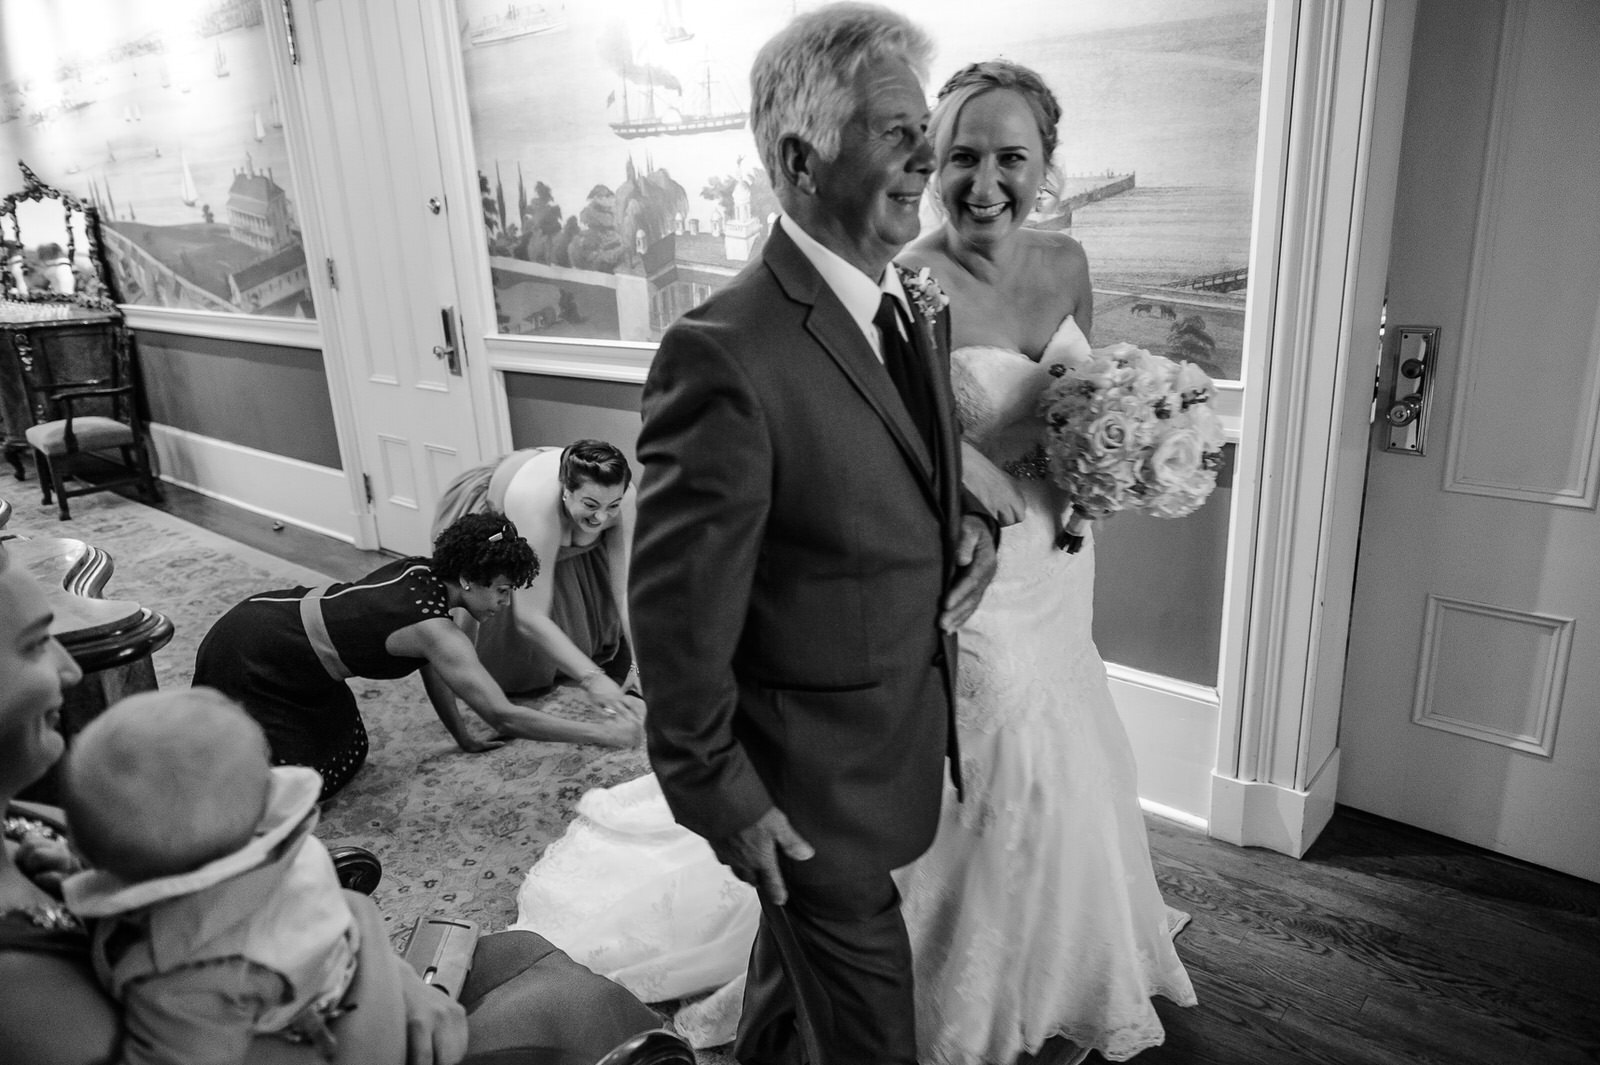 Candid Wedding Photo of the Bride Nicola and her Dad